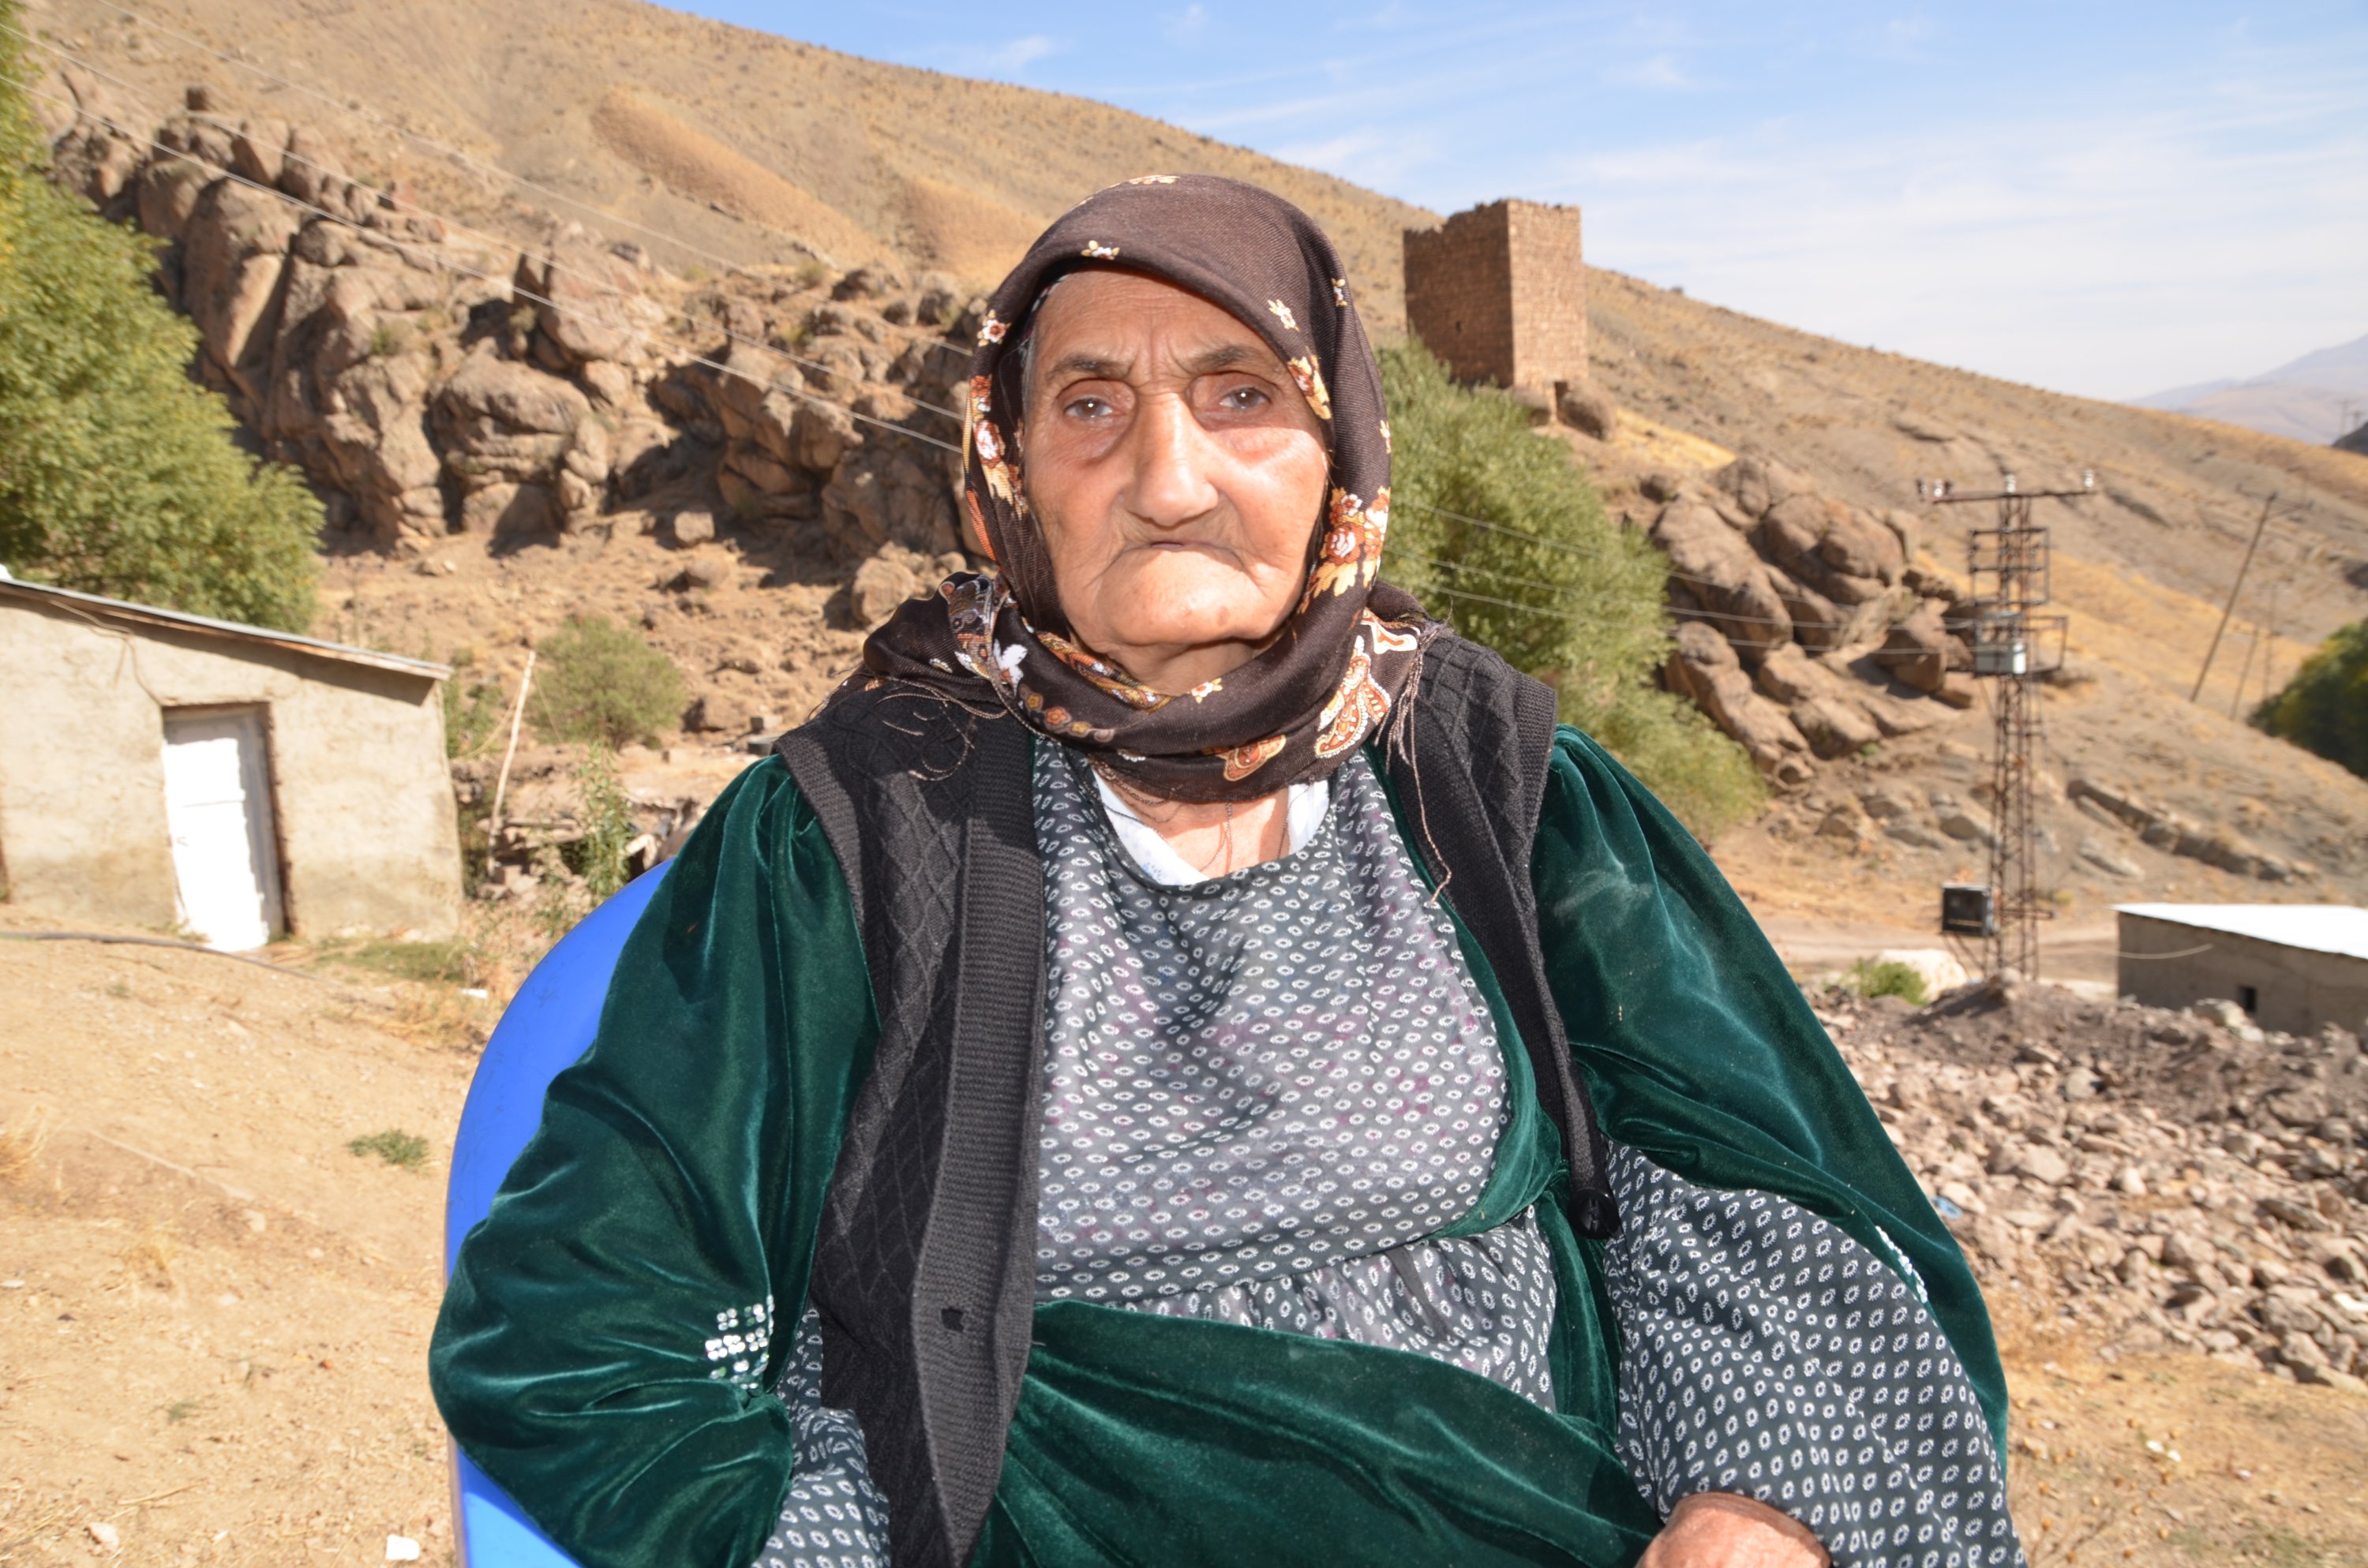 Having received her two doses of COVID-19 vaccination, 117-year-old Muteber Engindeniz beat COVID-19 without any problem, Hakkari, Turkey, Oct. 11, 2021. (AA Photo)